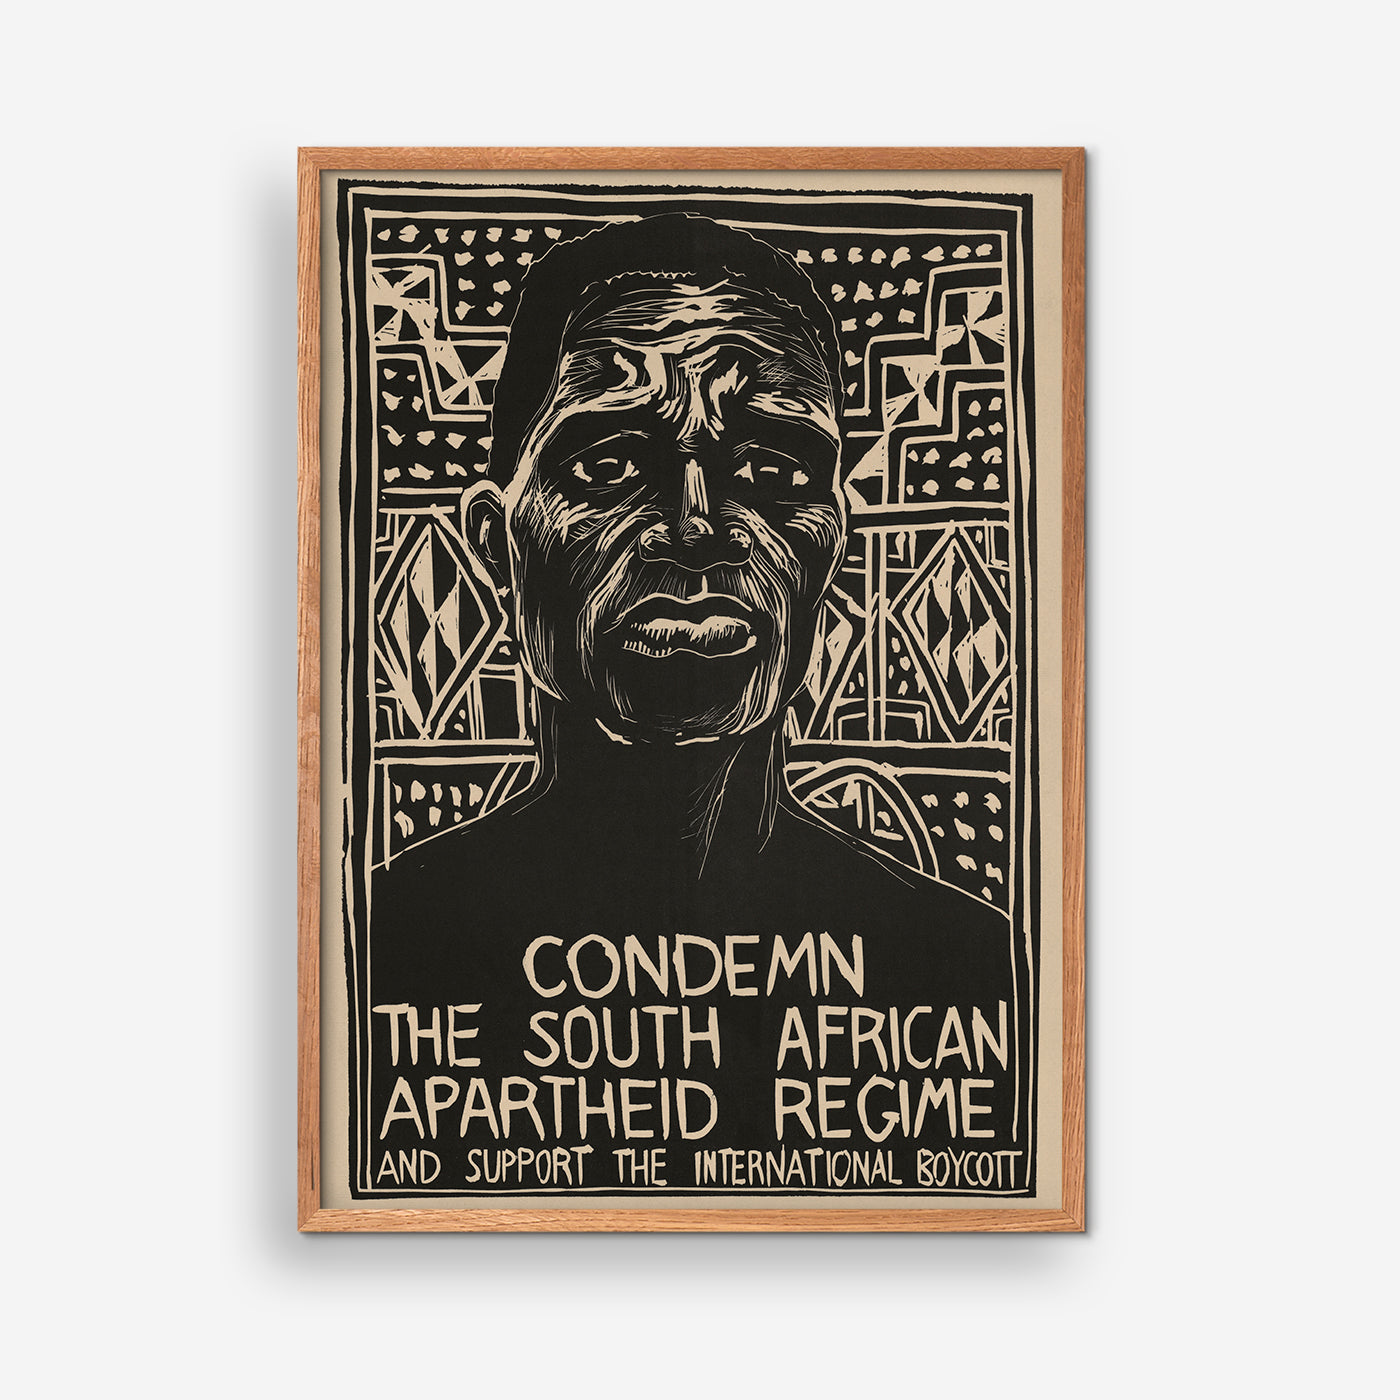 Condemn the South African apartheid regime and support the international boycott, 1976 - Rachael Romero